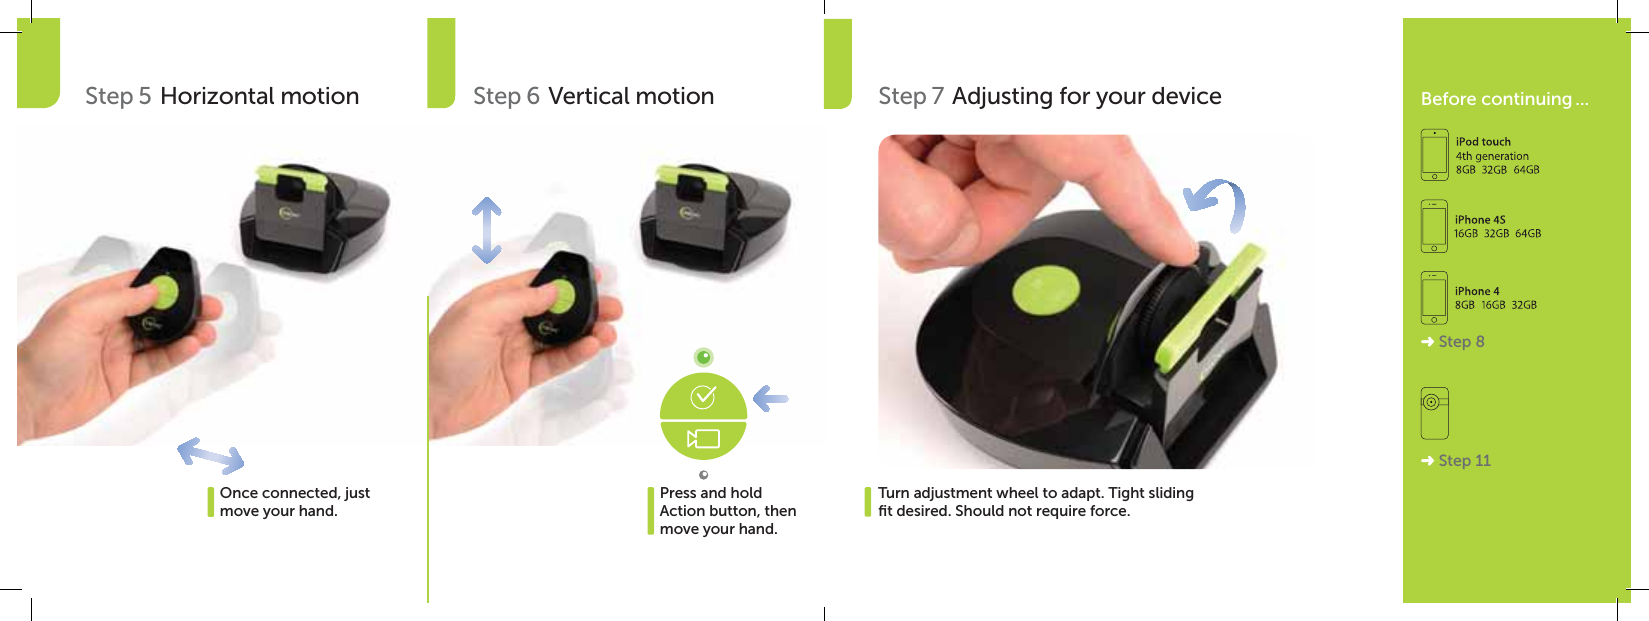 Step 5 Horizontal motionOnce connected, just move your hand.Press and hold Action button, then move your hand.Step 6  Vertical motion Step 7 Adjusting for your deviceTurn adjustment wheel to adapt. Tight sliding  ﬁt desired. Should not require force.Before continuing ...« Step 8« Step 11